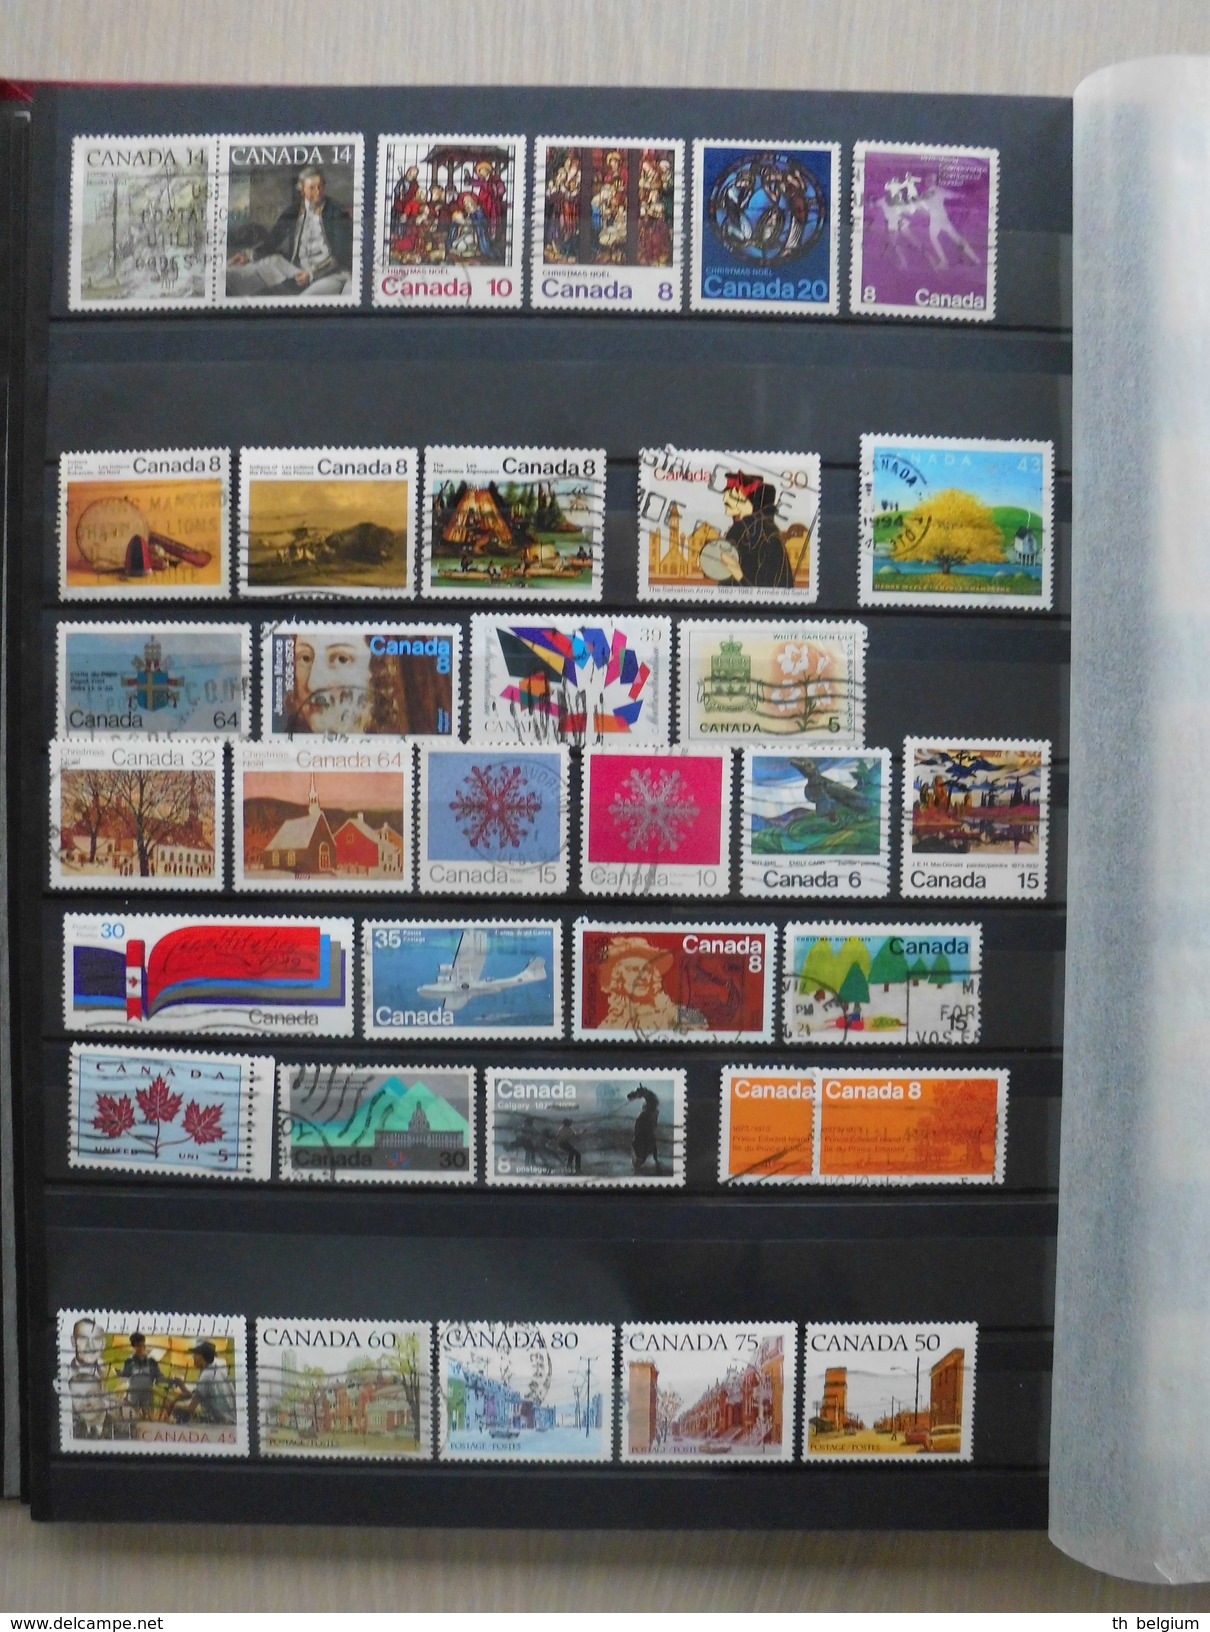 Canada collection of used stamps (+- 533 stamps)